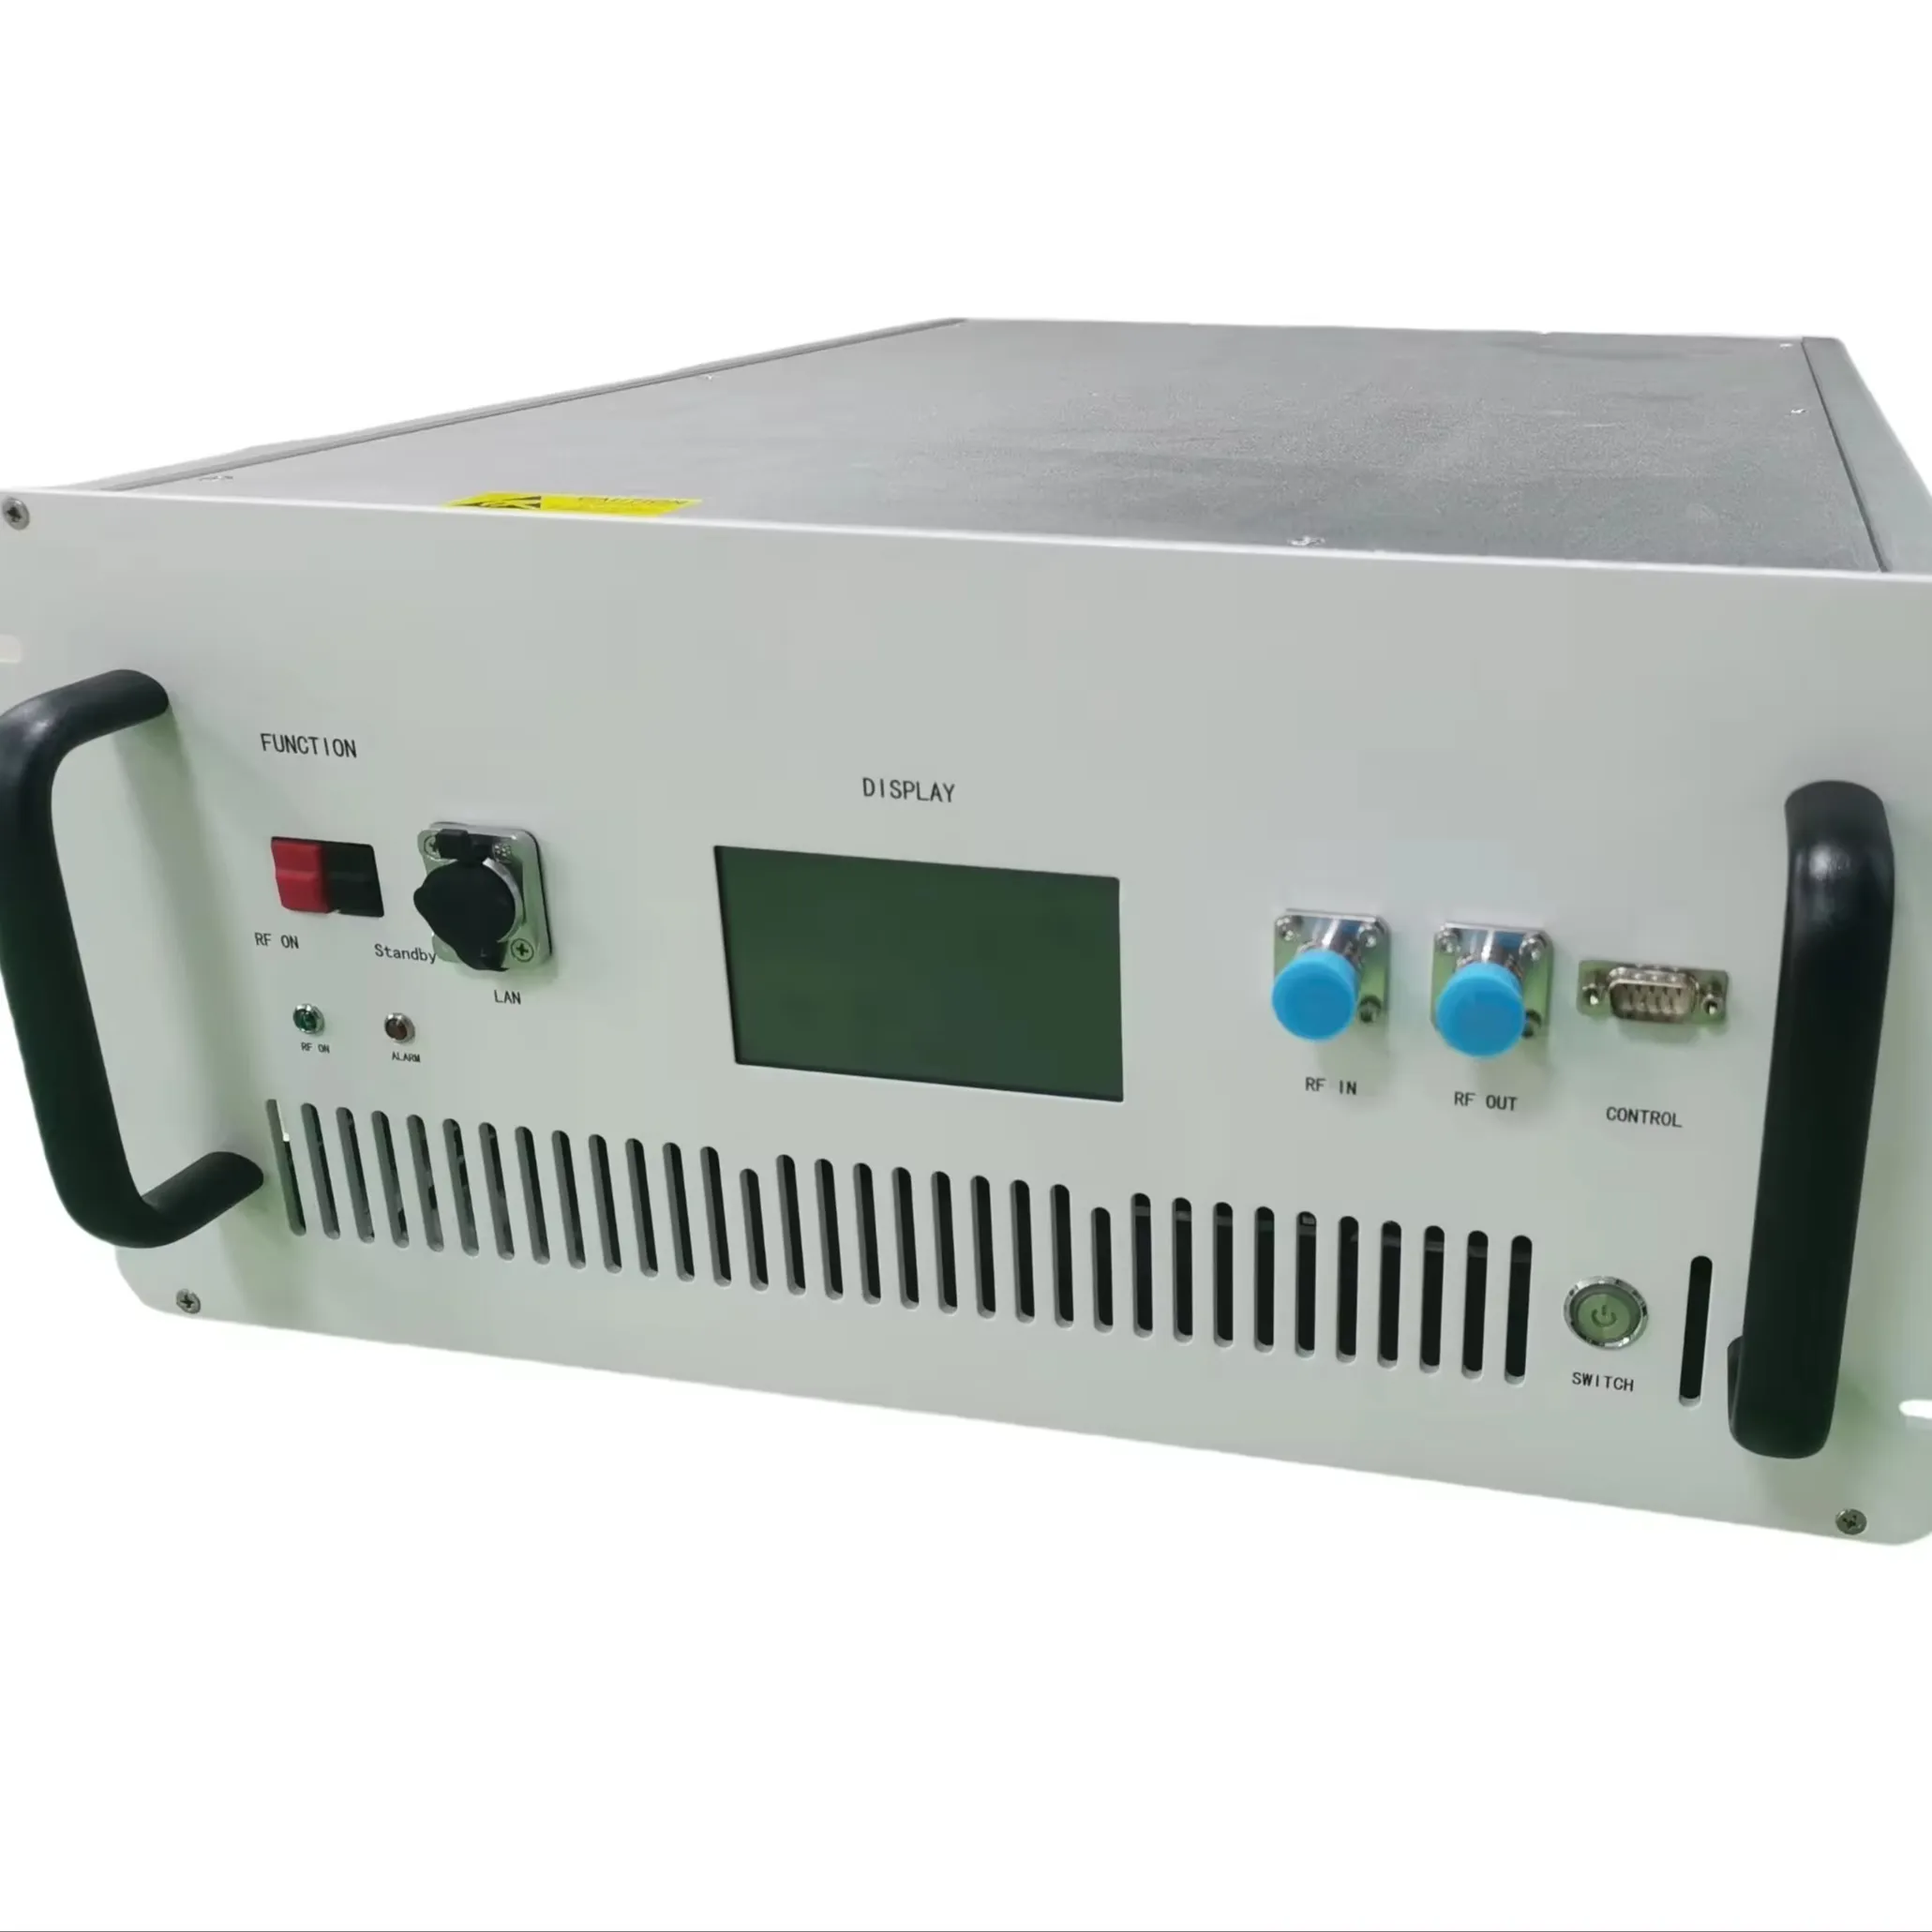 Hot sale 1000-6000 MHz 40W Ultra-wideband High power RF amplifier box for Providing power amplification in Electronic Warfare